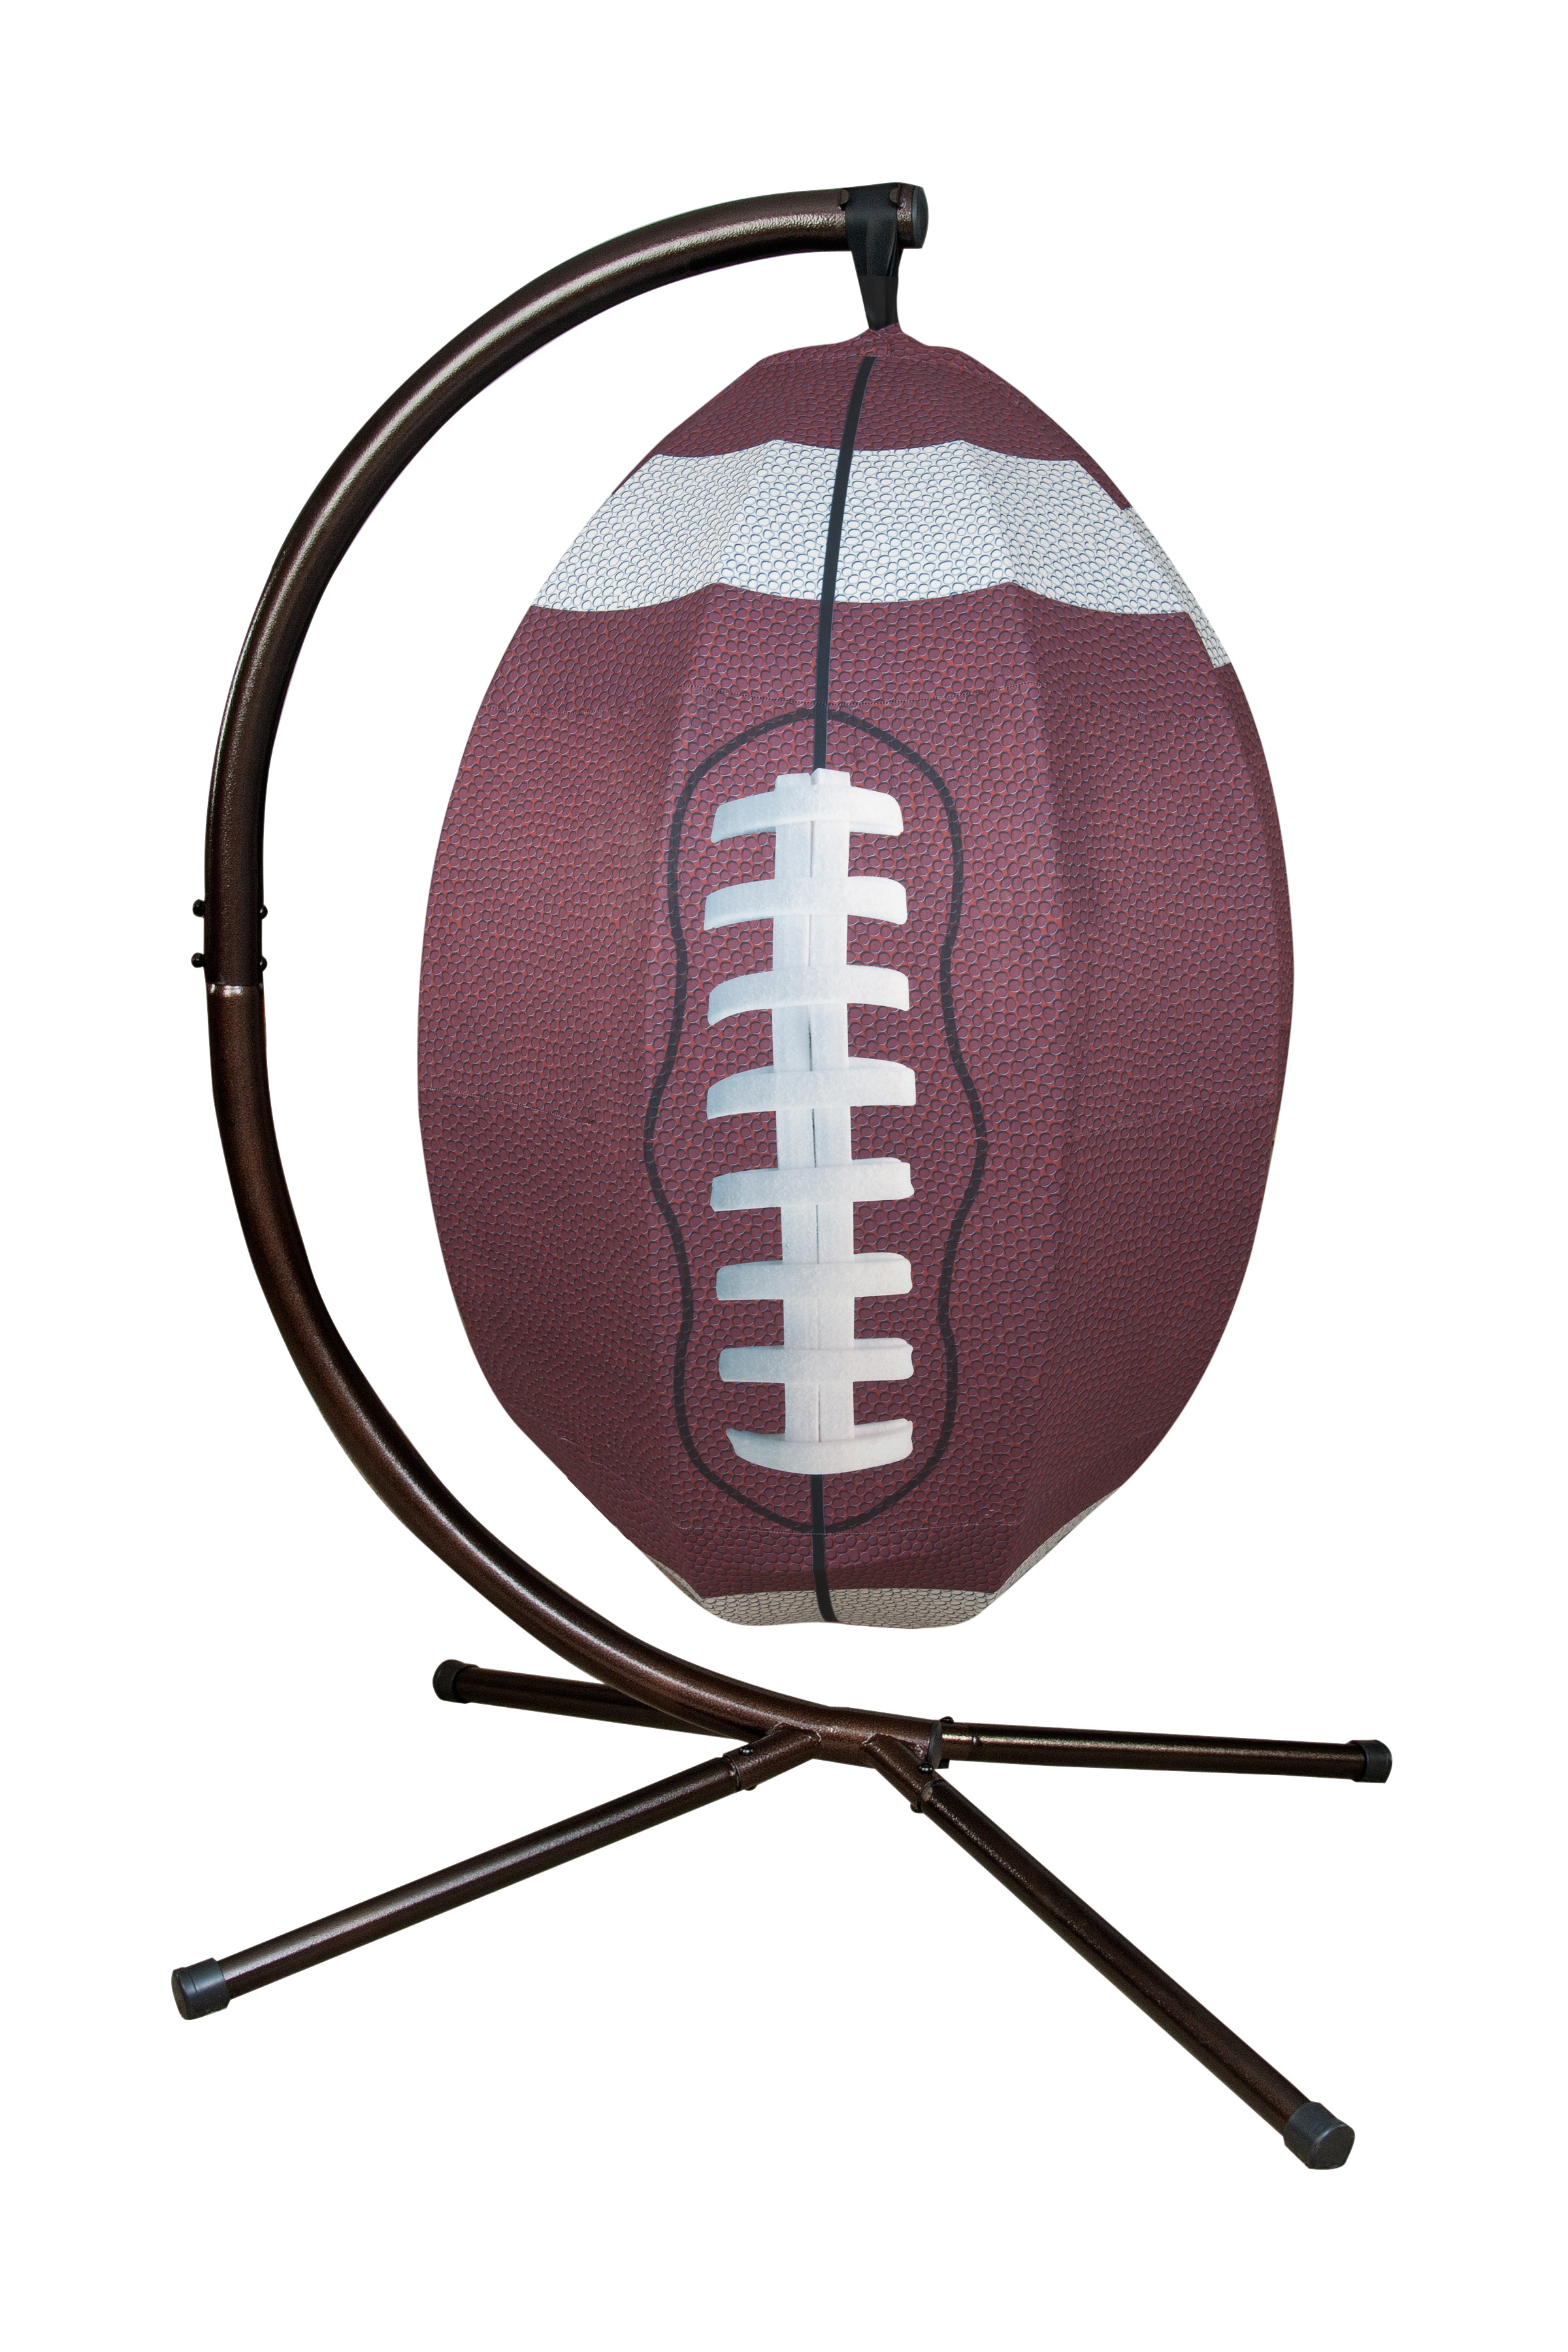 Flowerhouse Sports Ball Hanging Chair - image 2 of 6